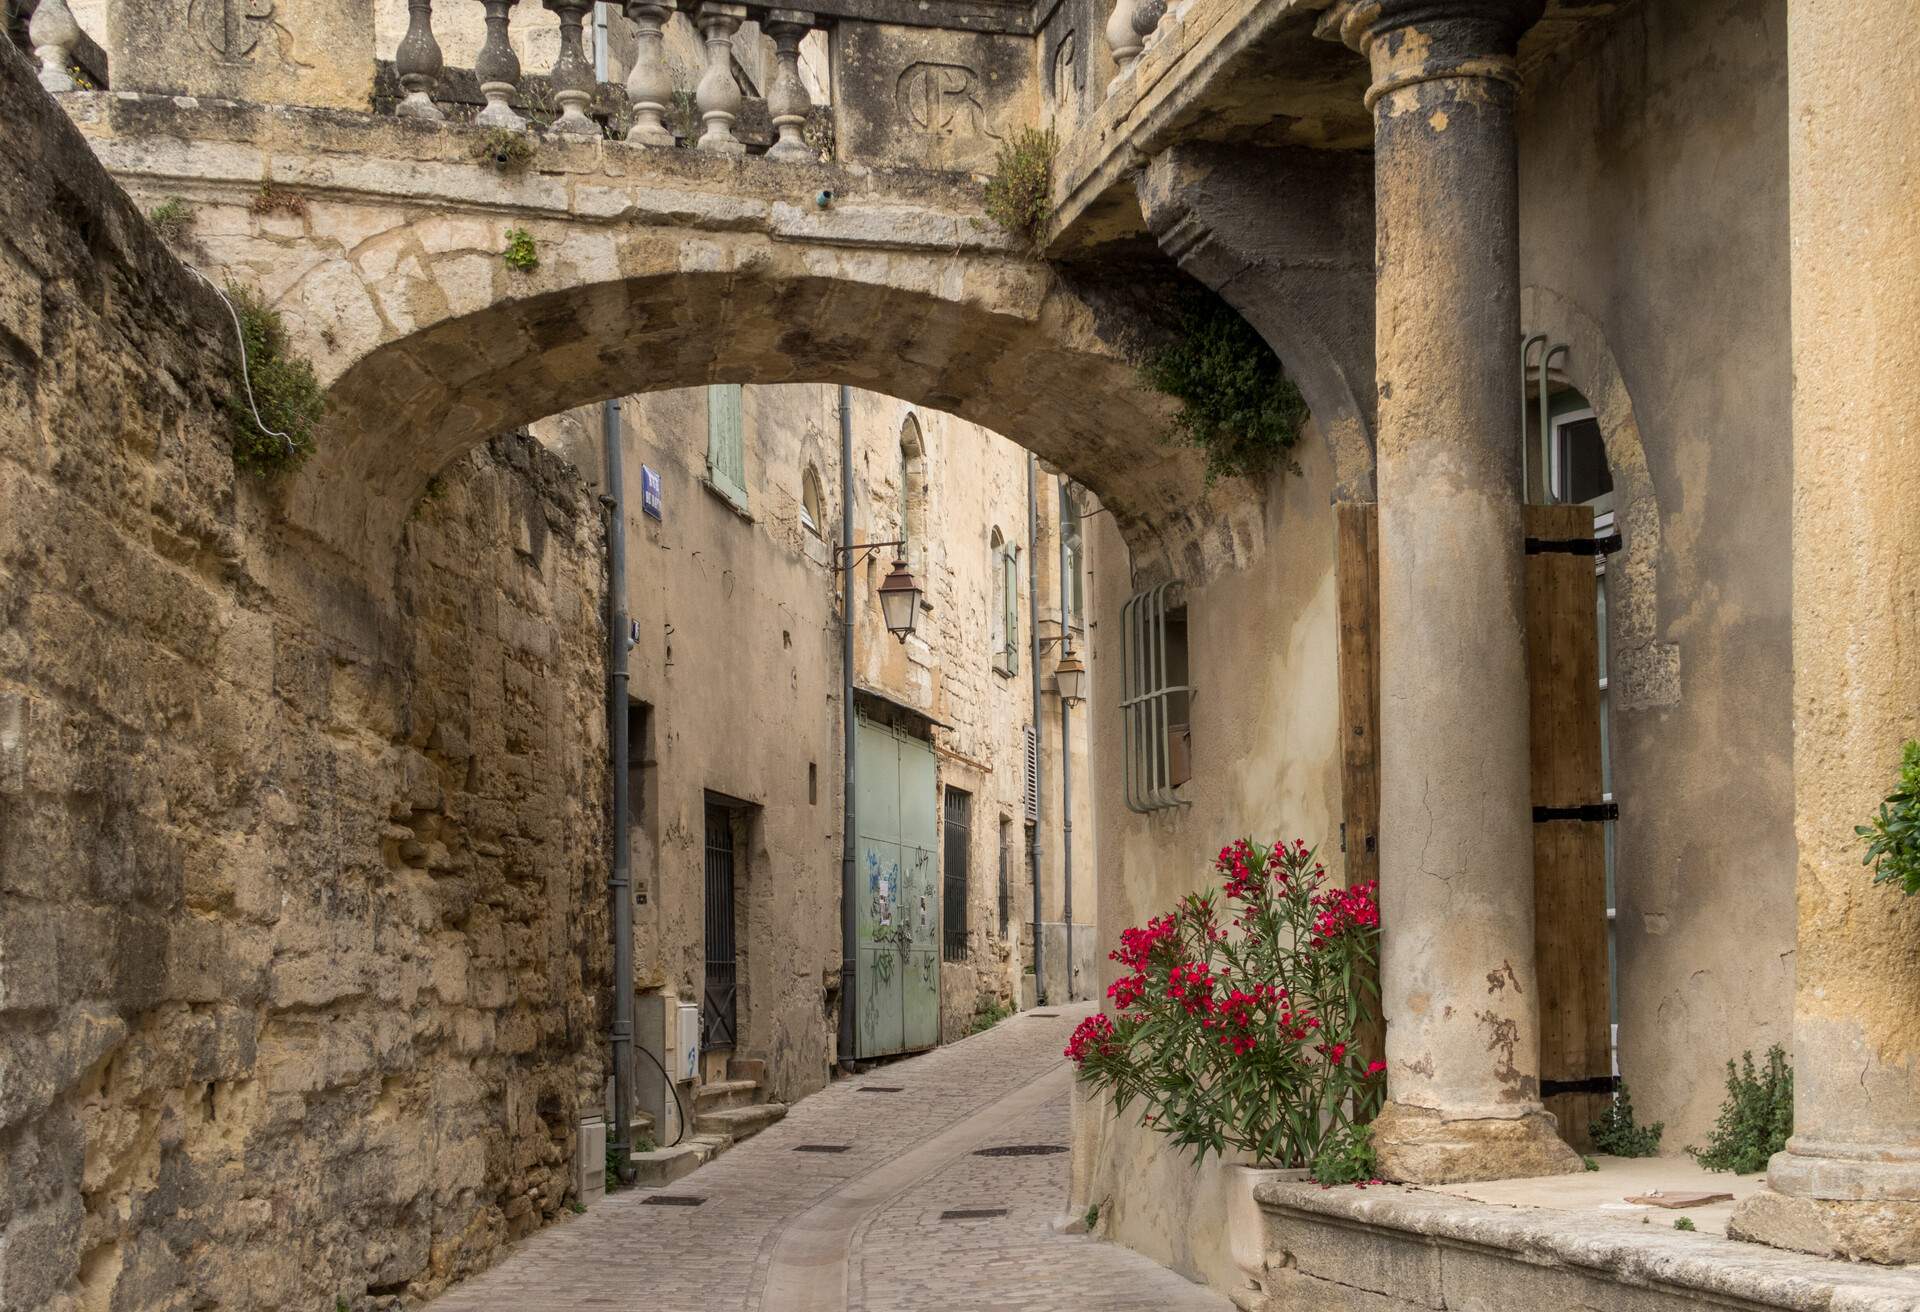 Old street with arch in the town of Uzès, region Gard, France